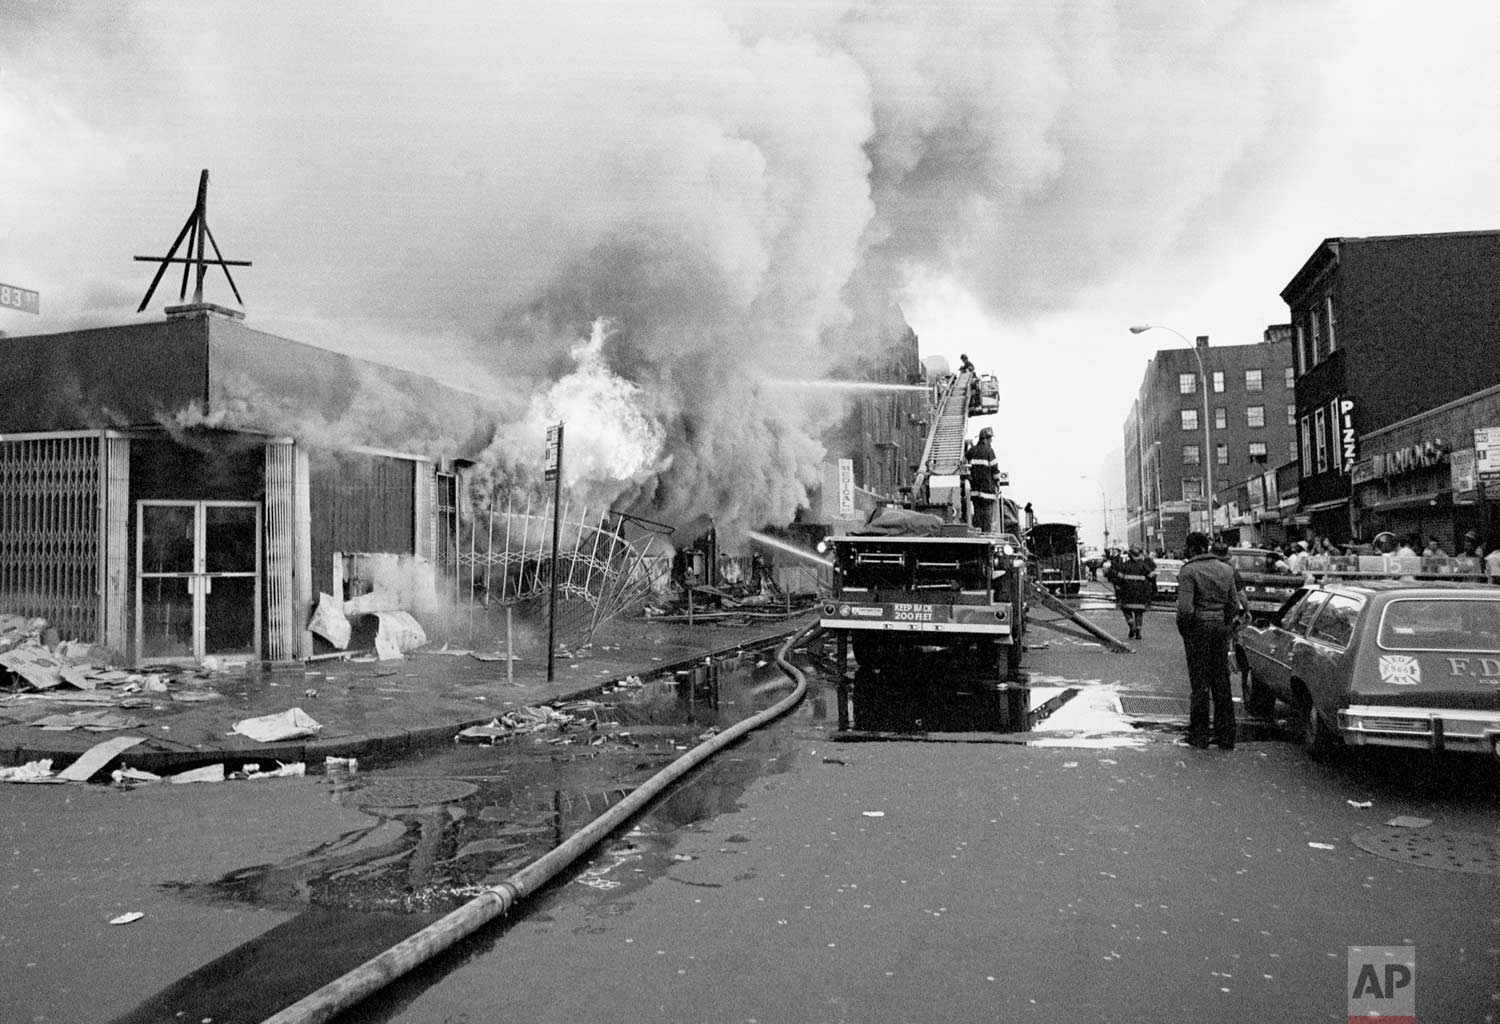  Firemen battle flames at a store in the Bronx borough of New York, one of many fires that broke out during the massive power failure that crippled the city for more than 24 hours, seen July 14, 1977. Firemen answered 1,500 alarms, 400 of which were 